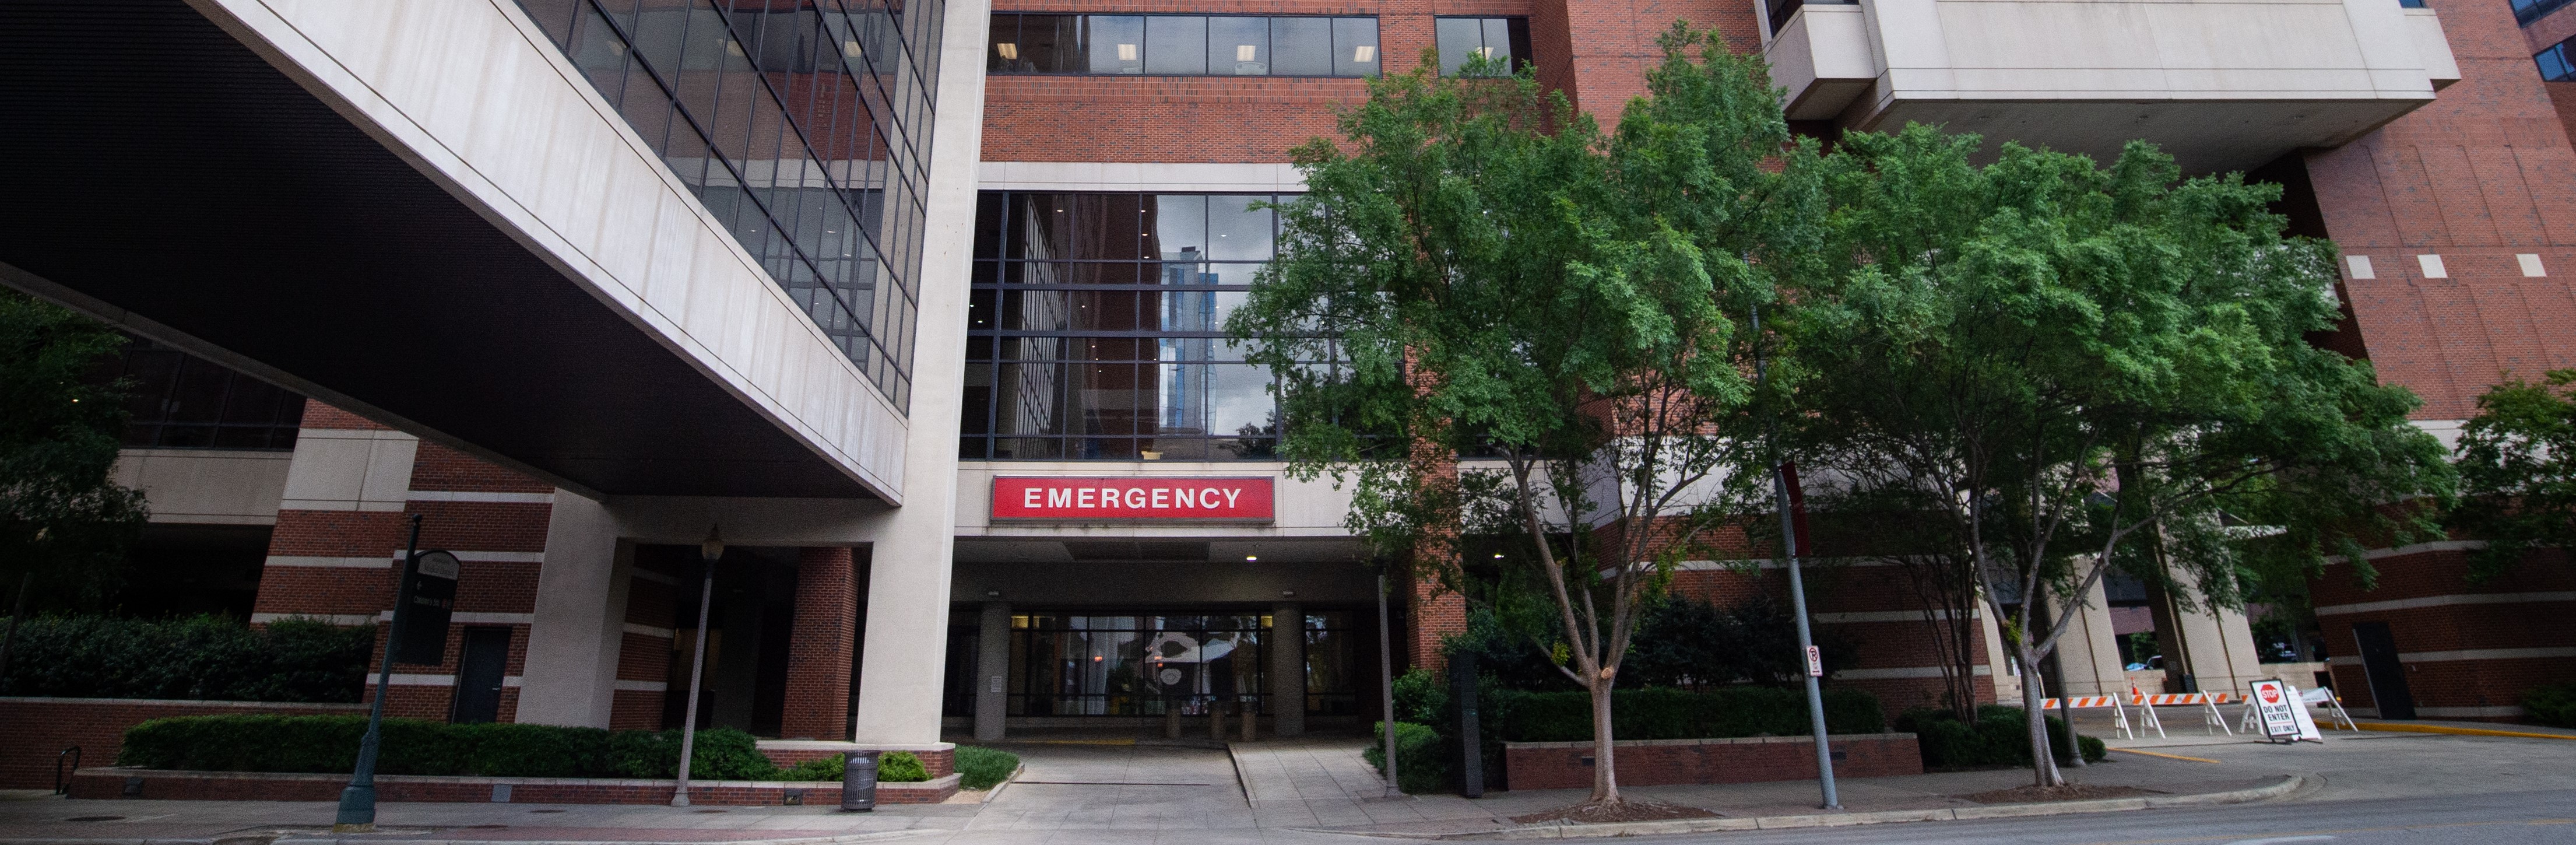 Exterior of the Emergency Department in the North Pavilion of UAB Hospital showing the "Emergency" sign, April 2020.